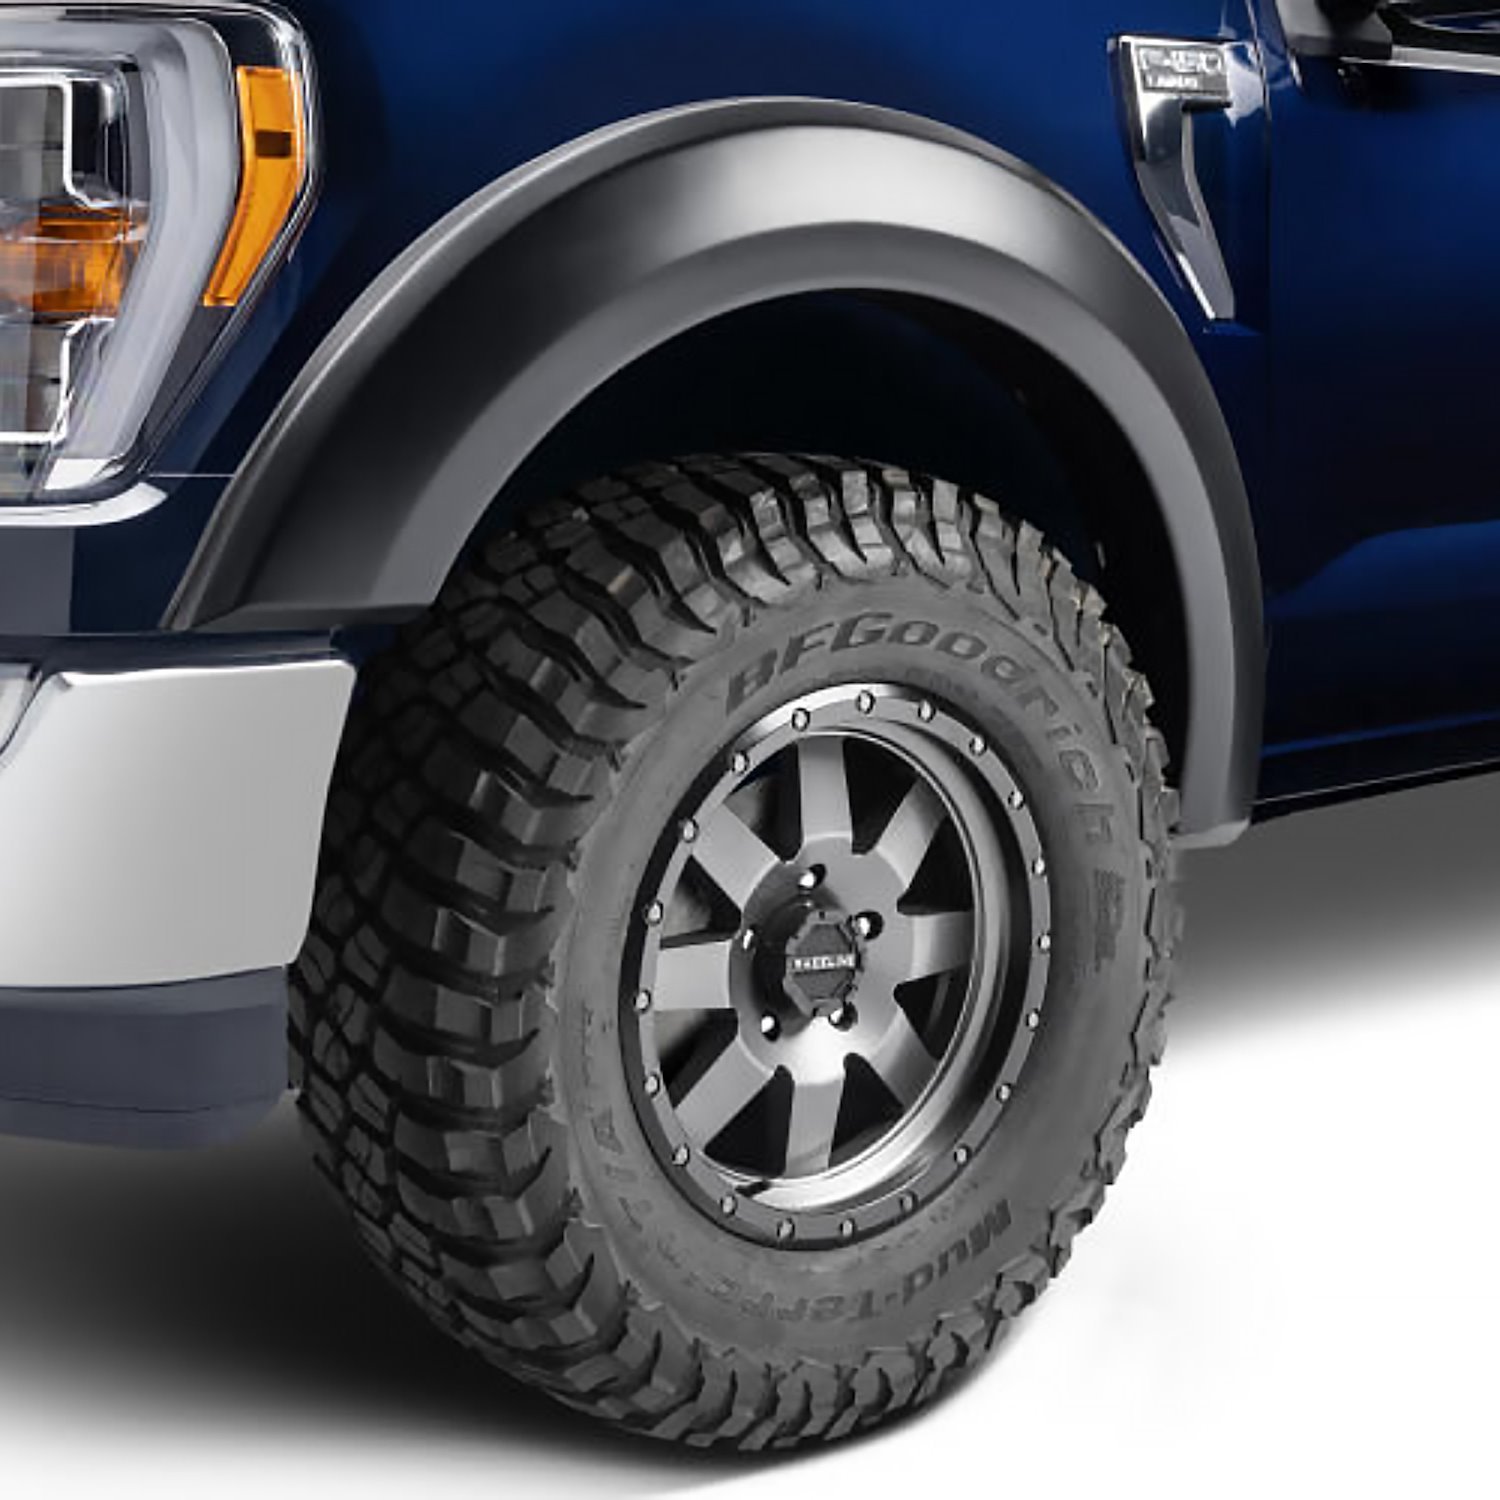 Extend-A-Fender Front Flares for Select Ford F-150 Trucks - Matte Black Smooth Finish